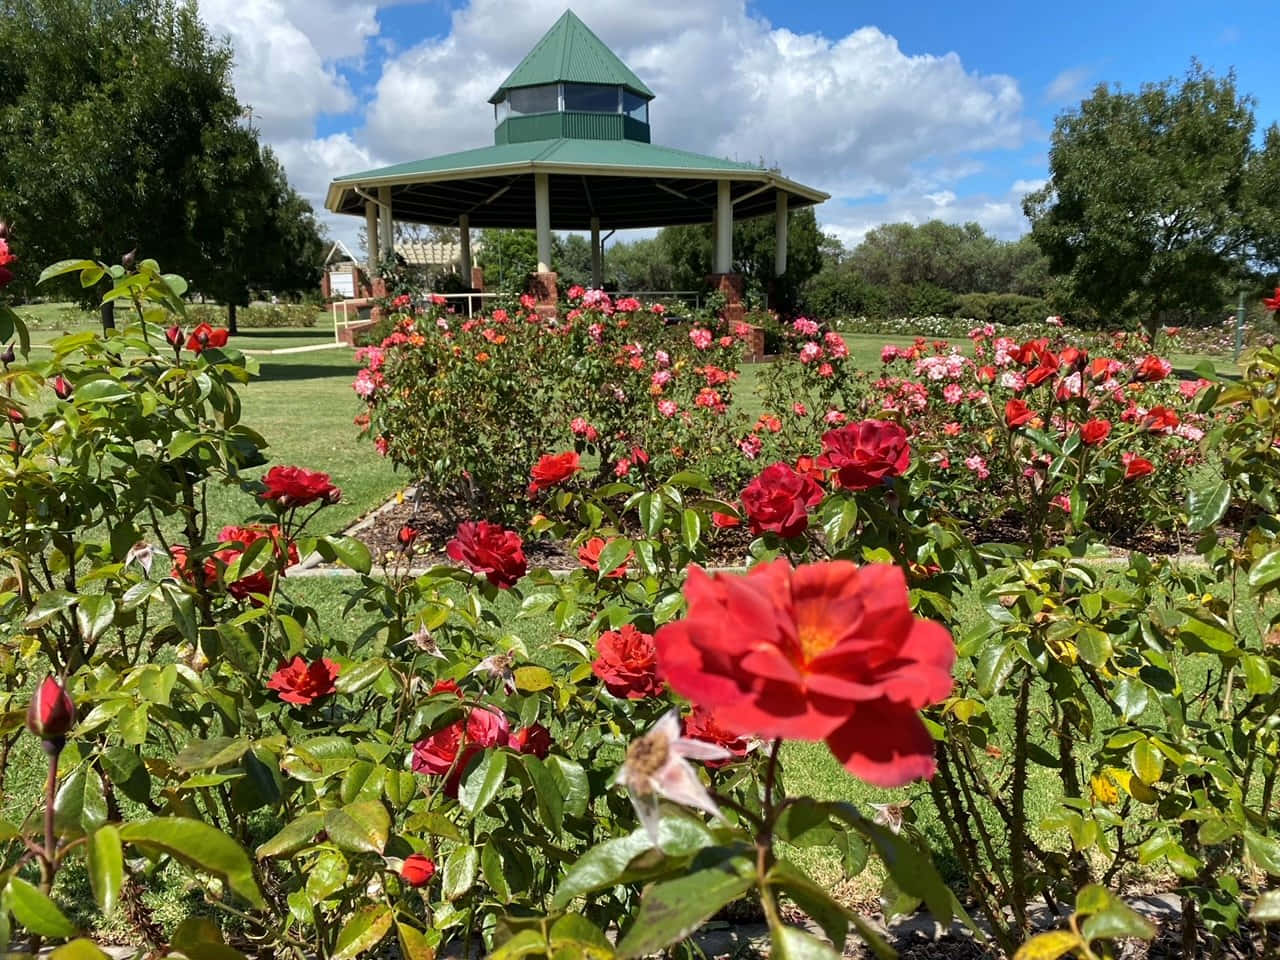 Enjoy the beauty of roses blooming in this serene rose garden.